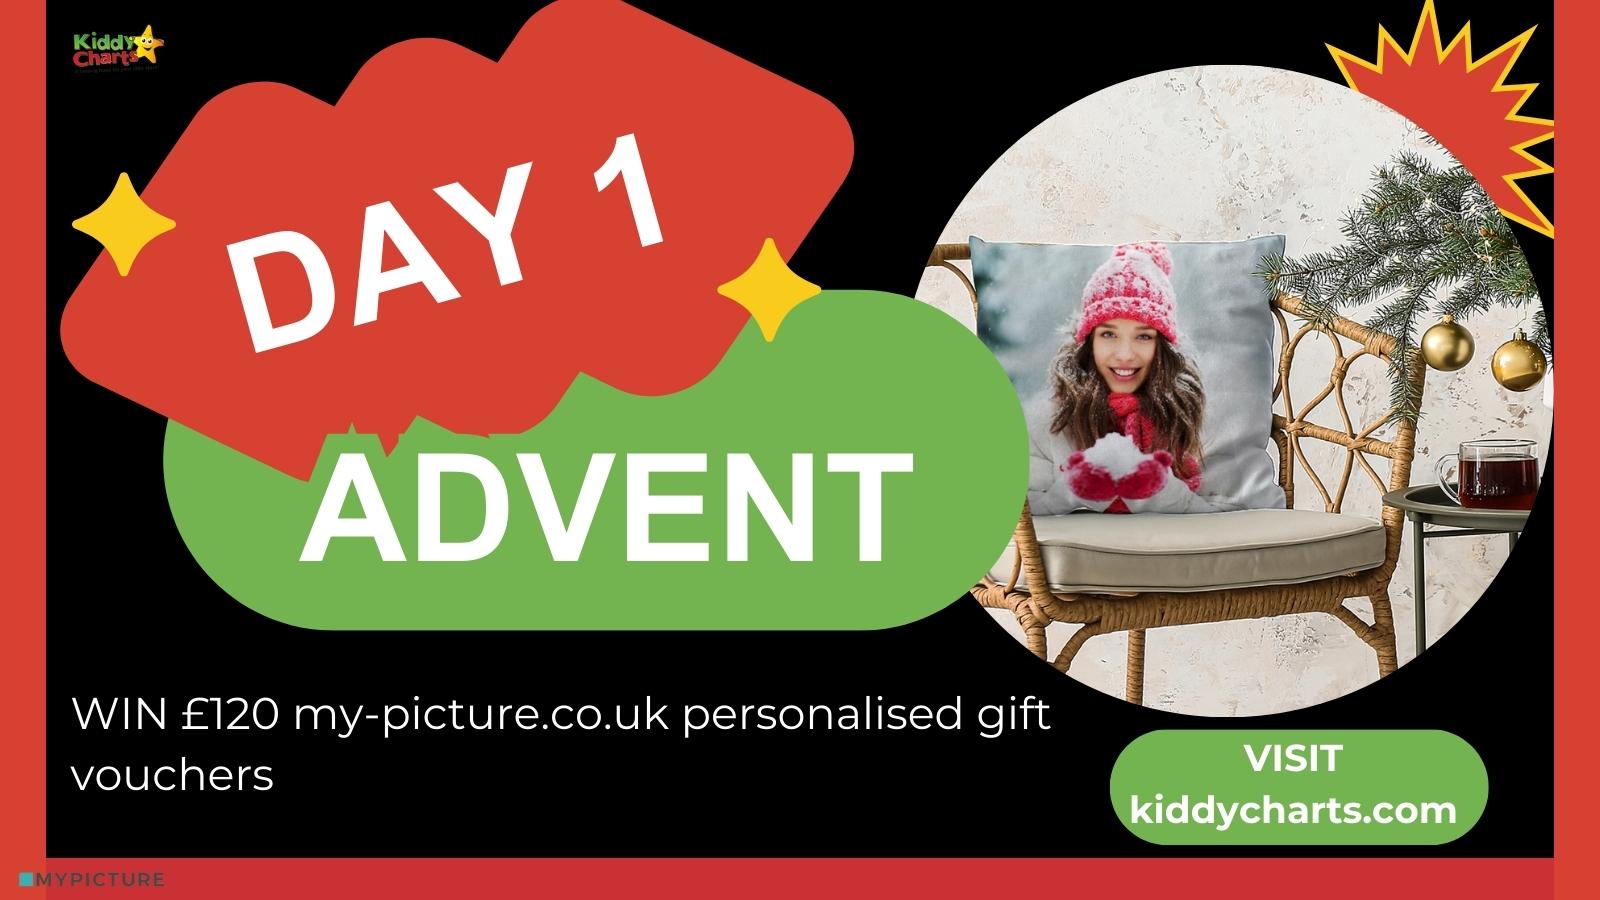 Day 1: Win £120 of MyPicture vouchers for a personalised Christmas #KiddyChartsAdvent